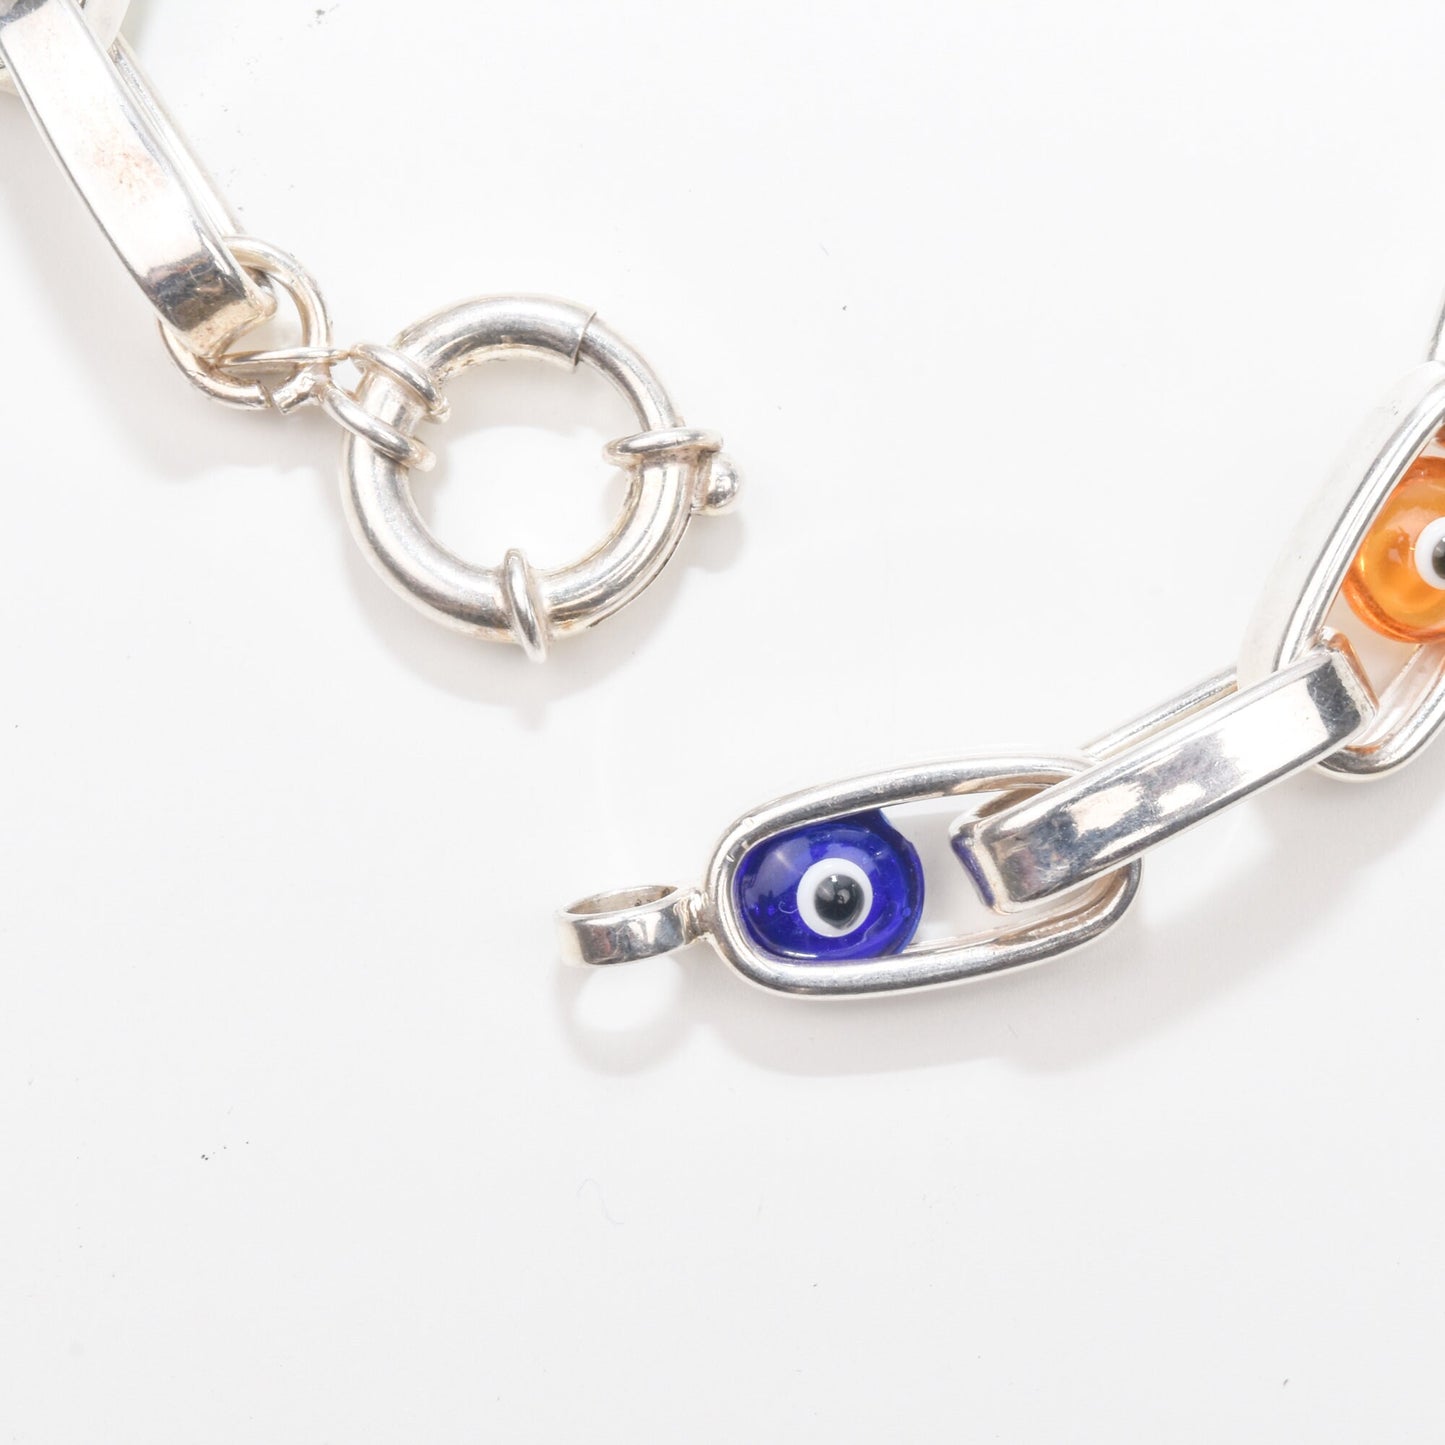 Modernist Evil Eye Bracelet In Sterling Silver, Colorful Glass Beads, Hollow Oval Link Chain, 8" L